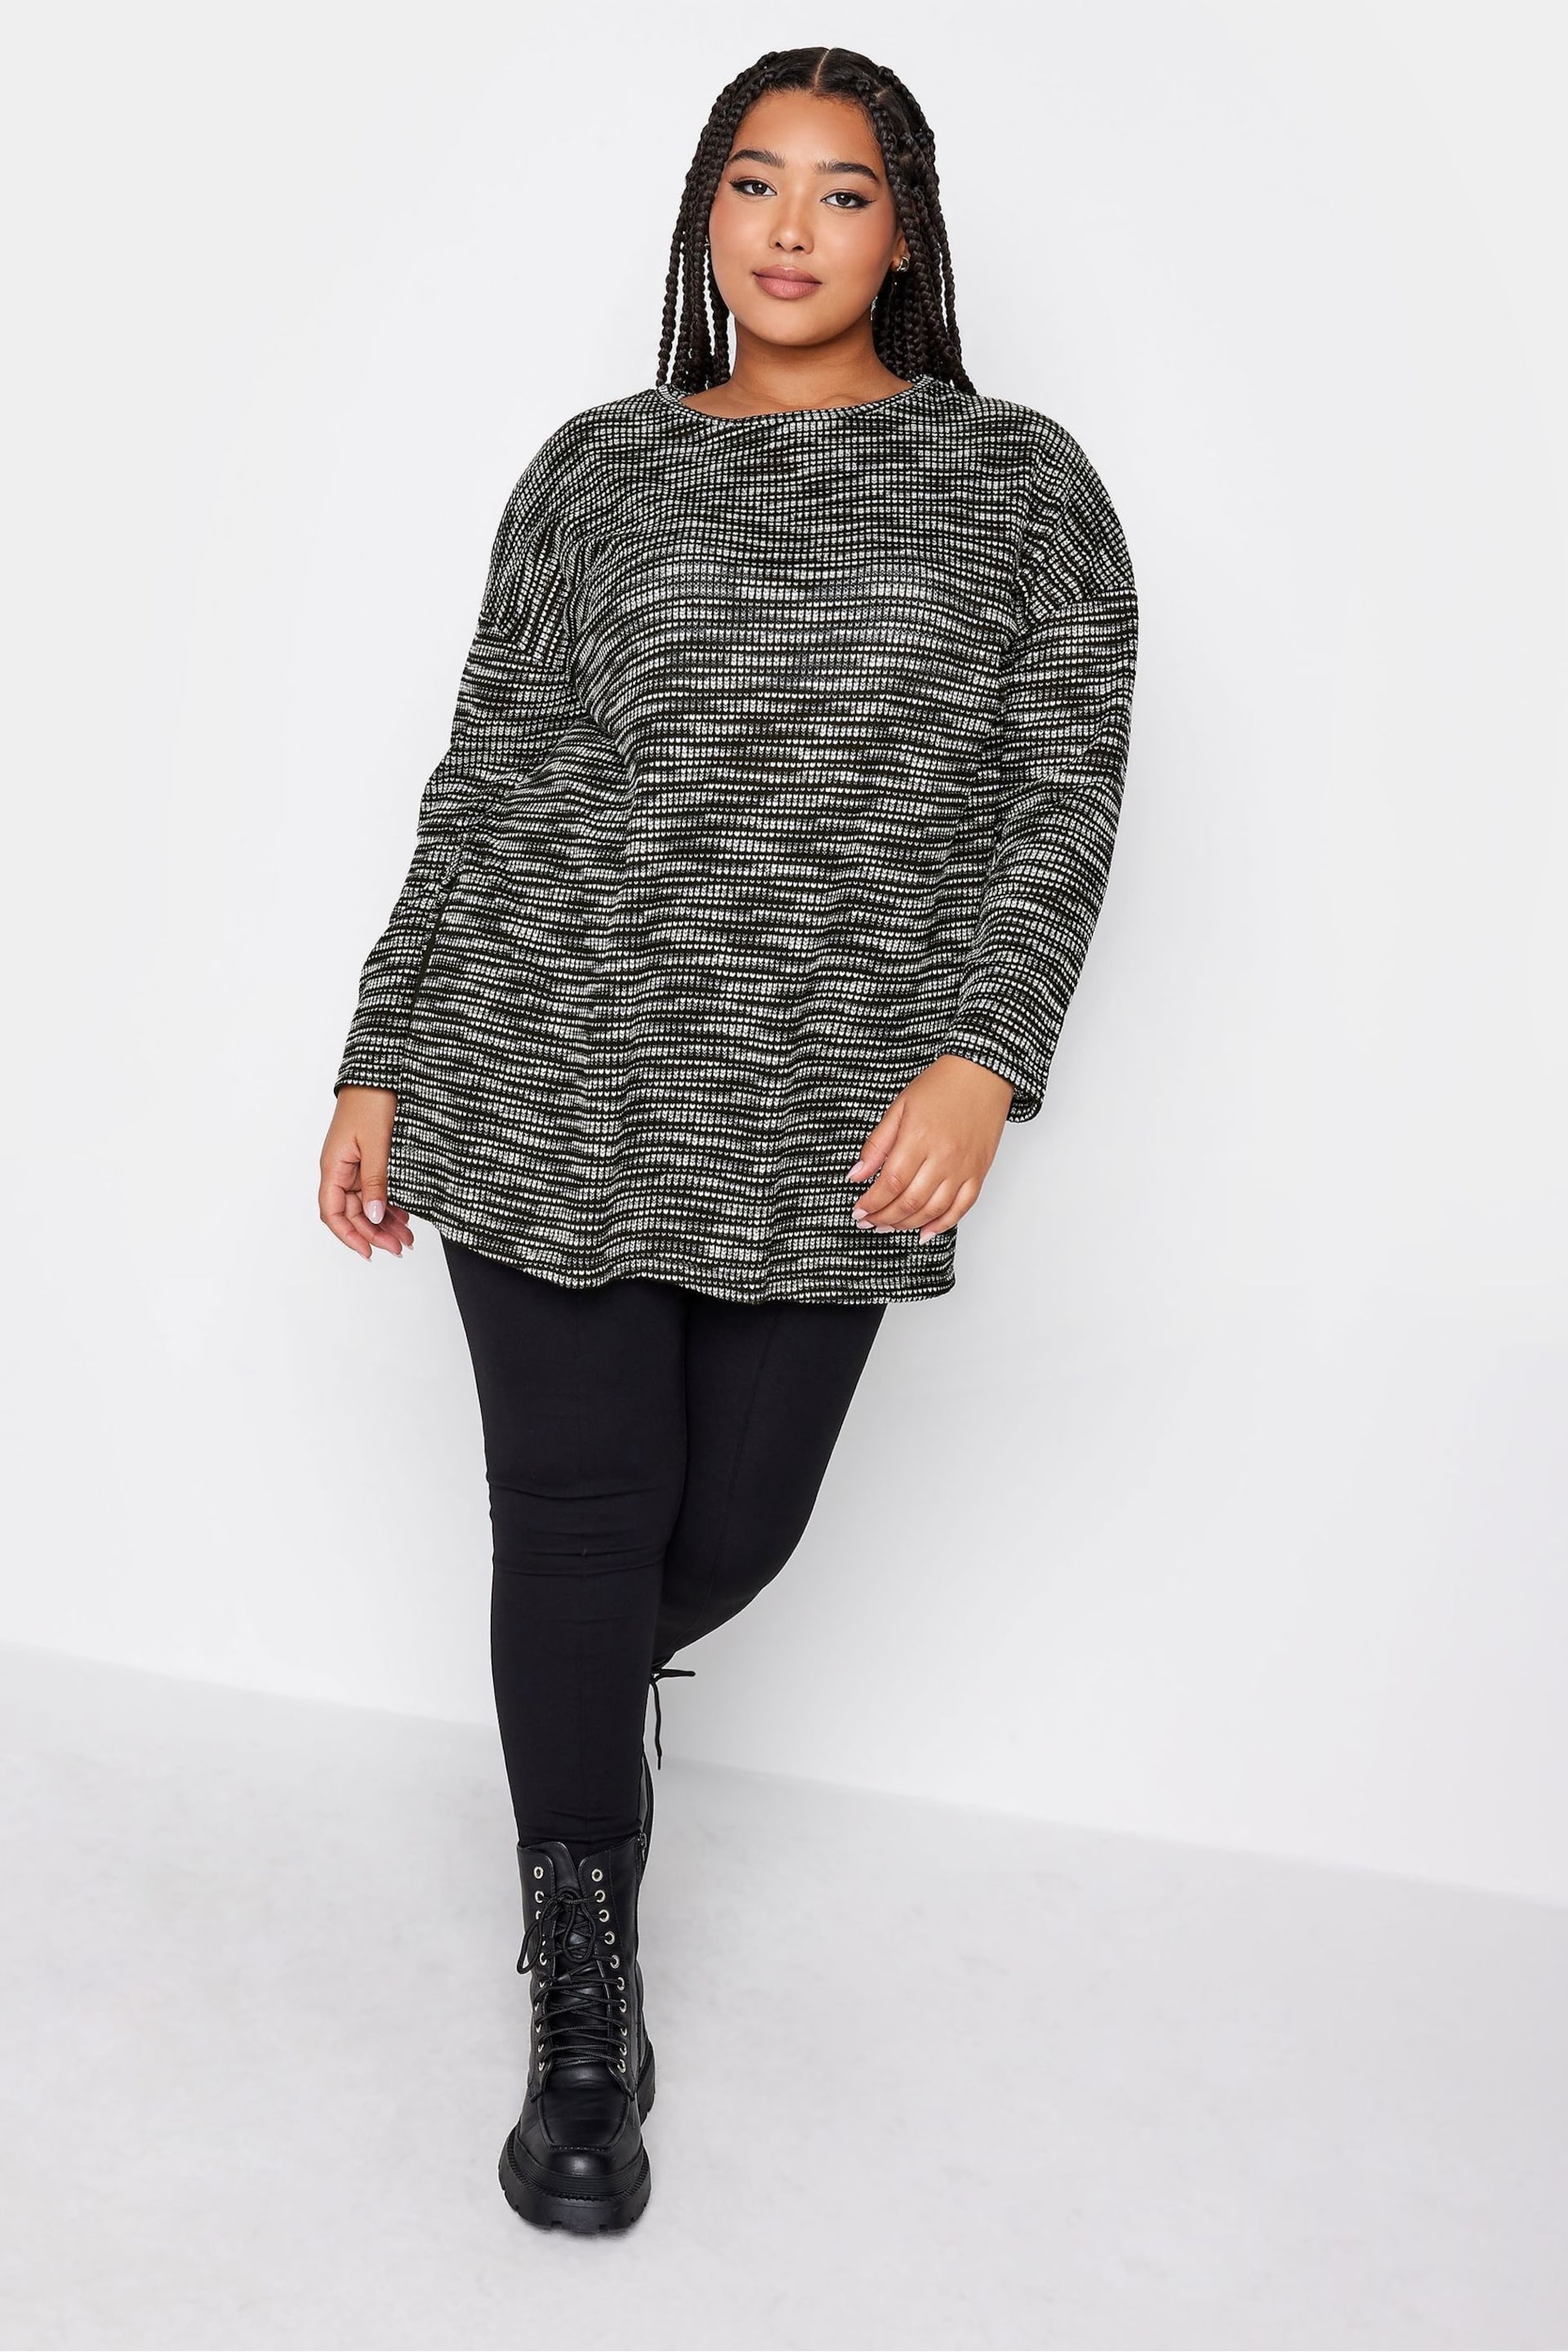 Yours Curve Black Contrast Trim Long Sleeve Top - Image 3 of 4